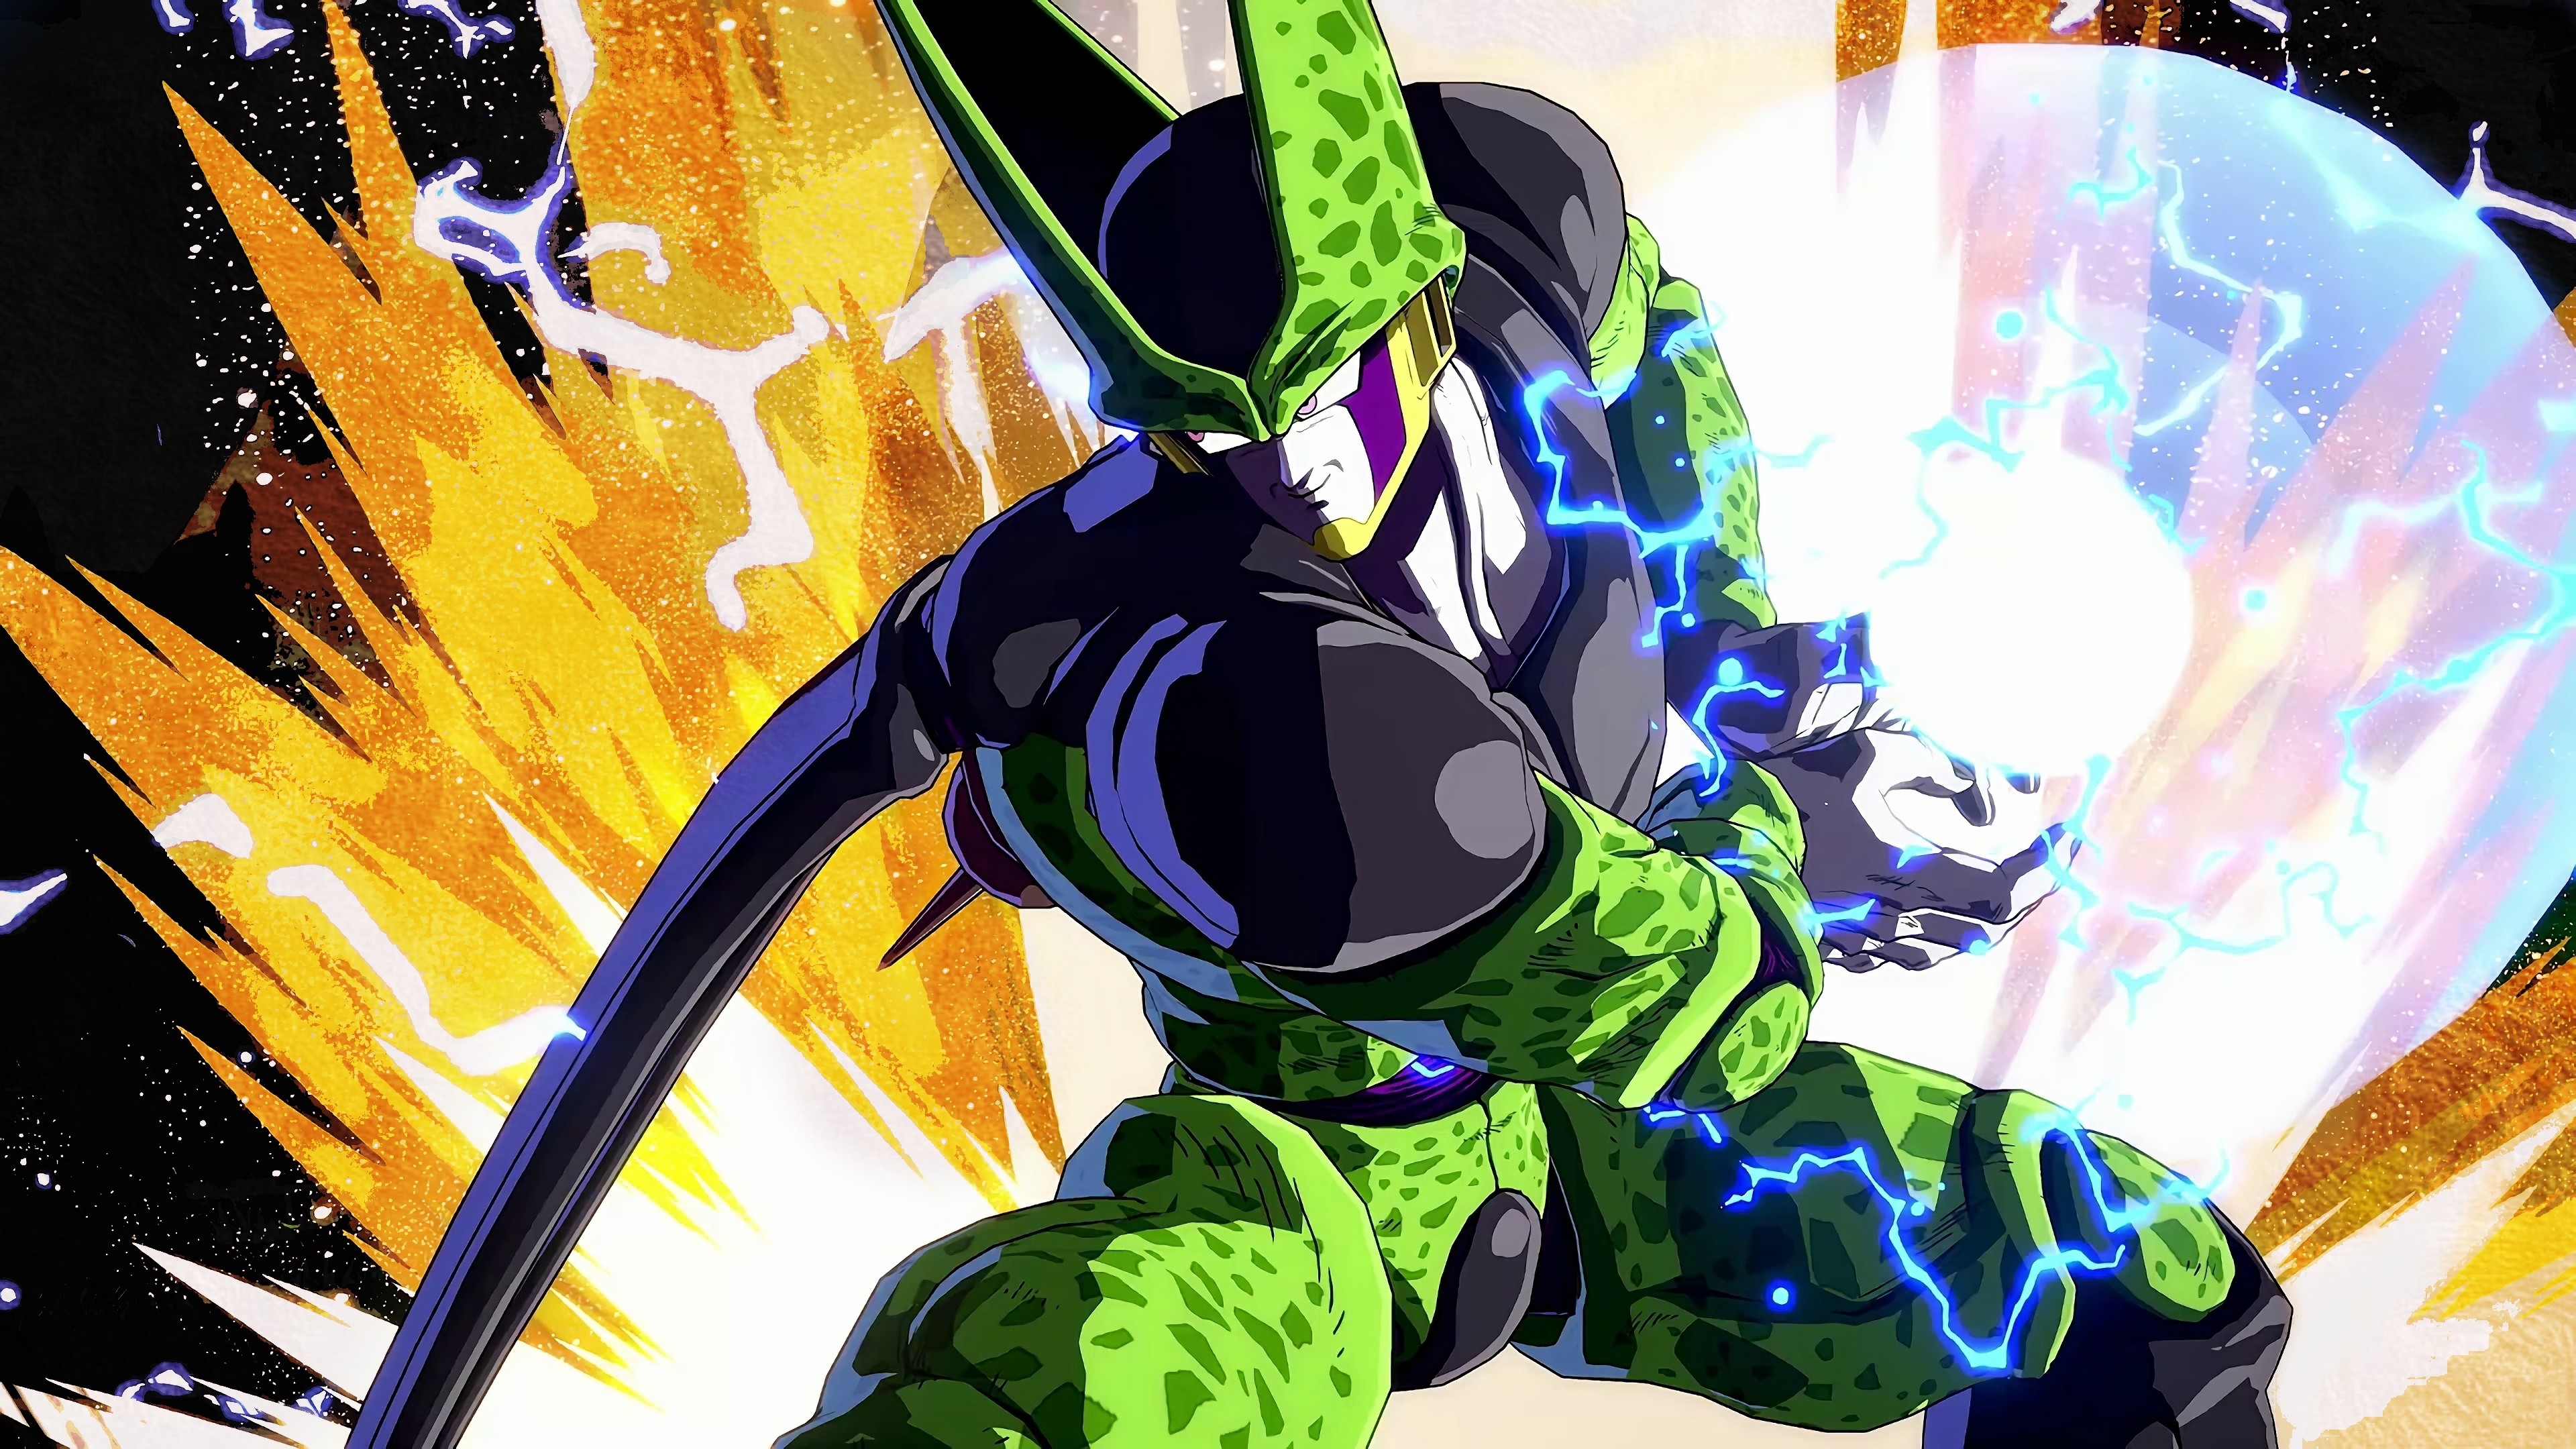 HD cell (dragon ball) wallpapers